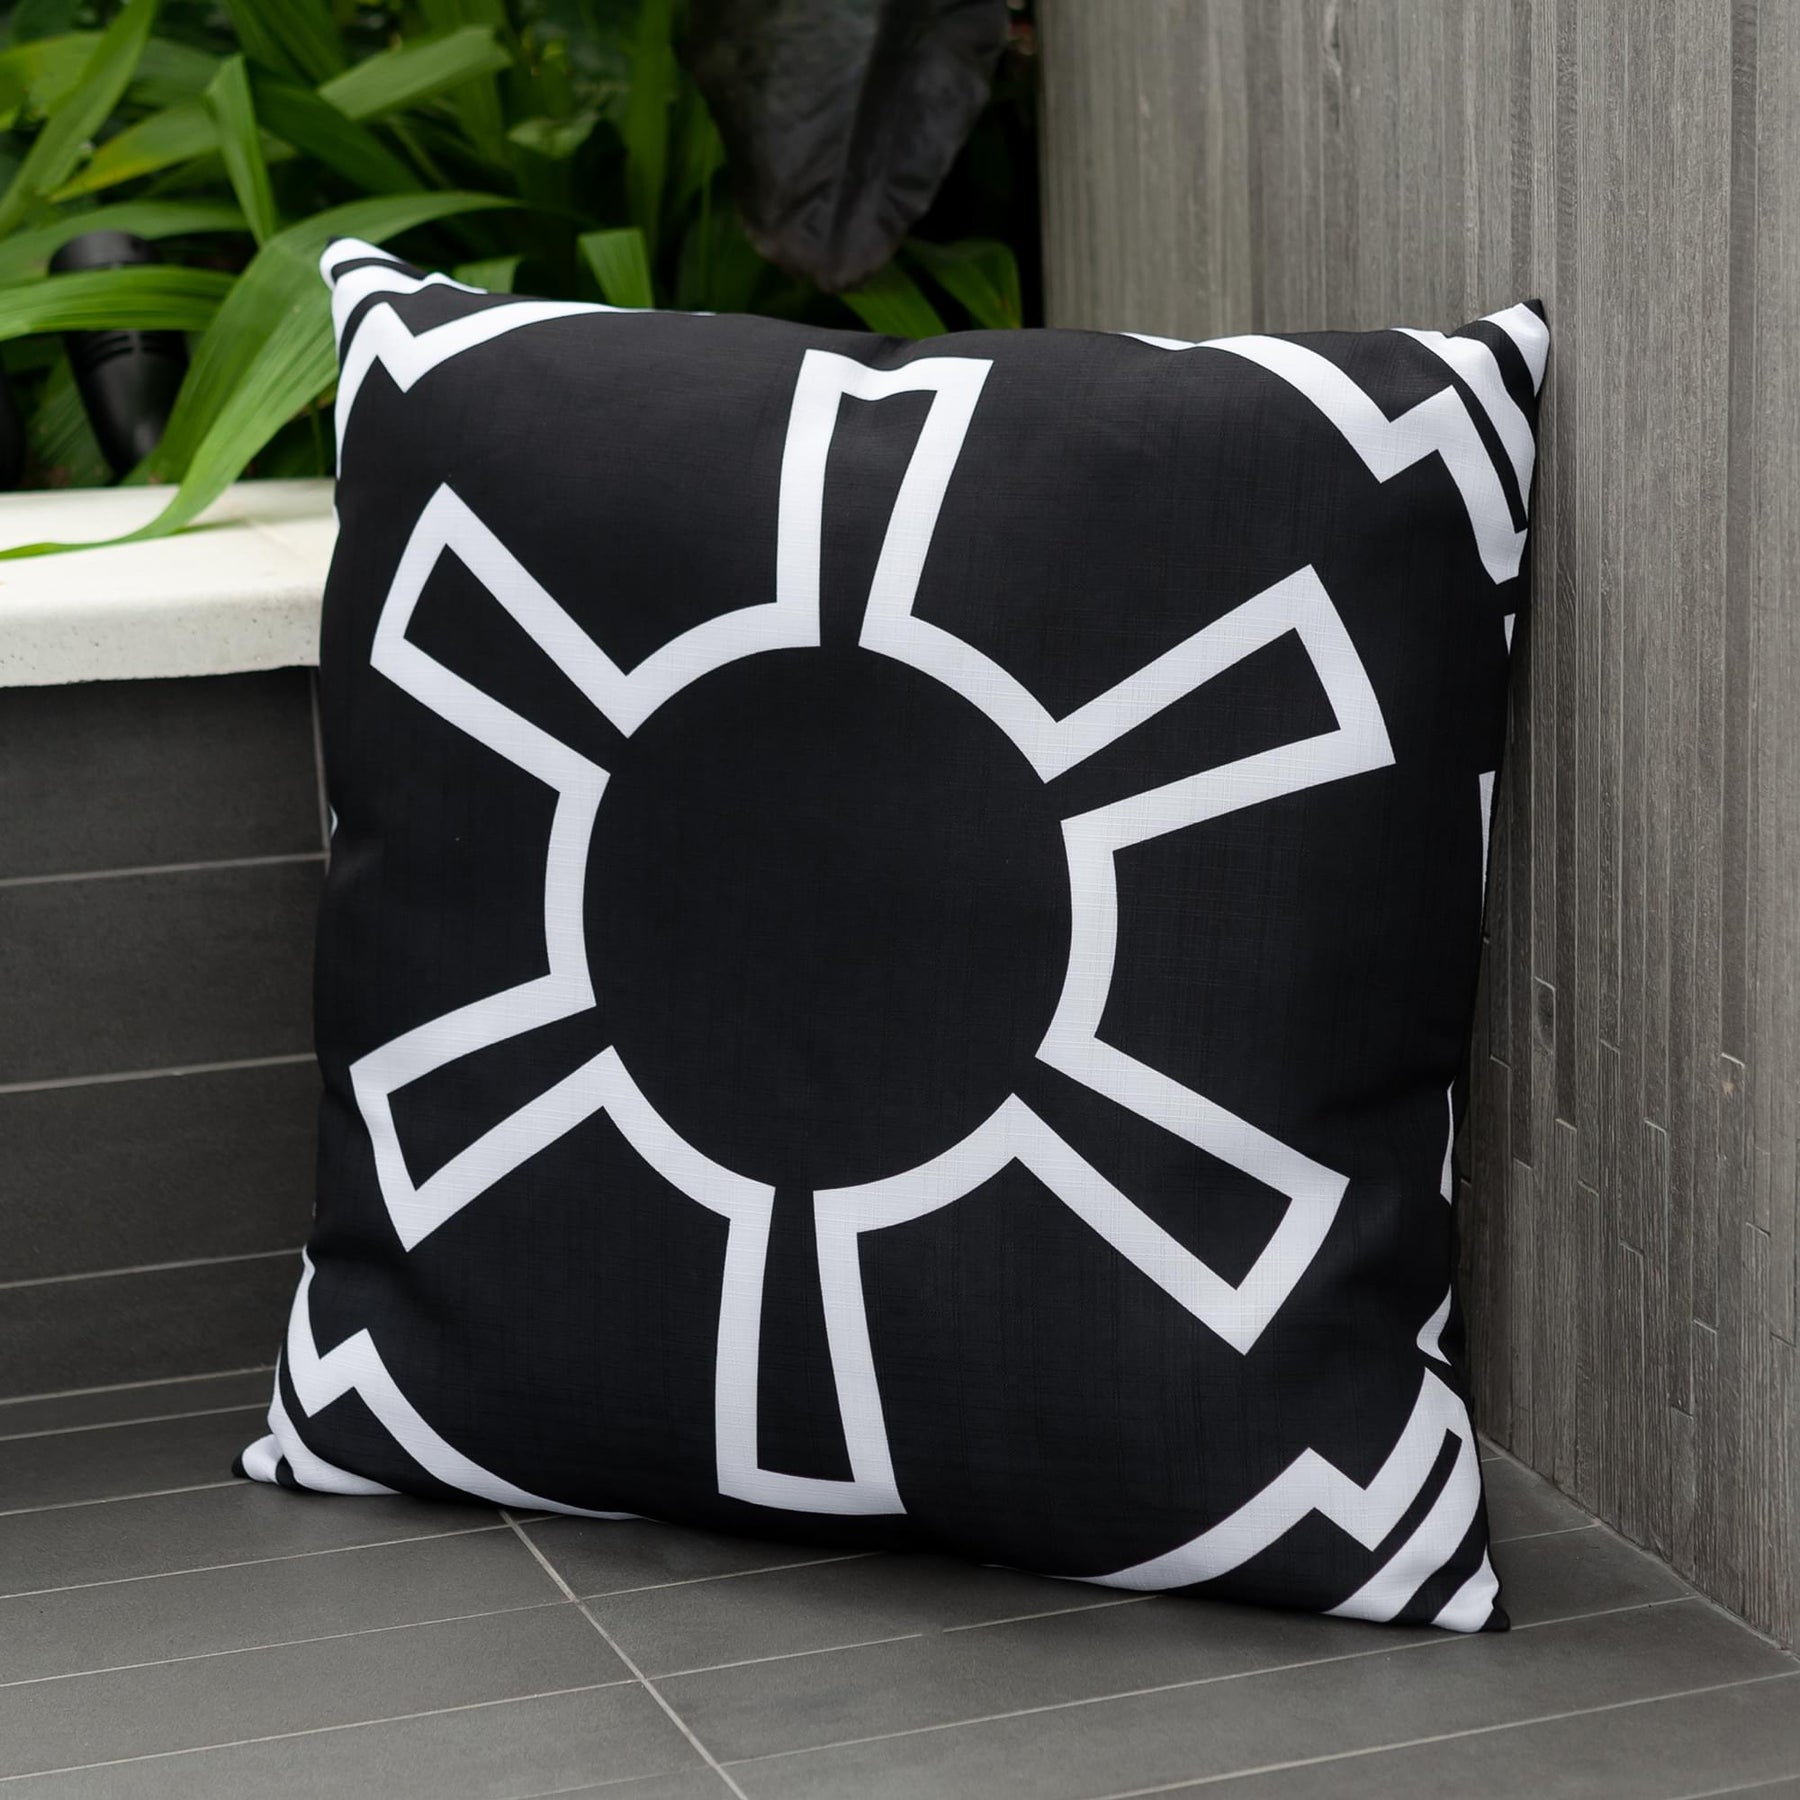 Star Wars Large Throw Pillow | Empire Imperial Symbol Design | 25 x 25 Inches